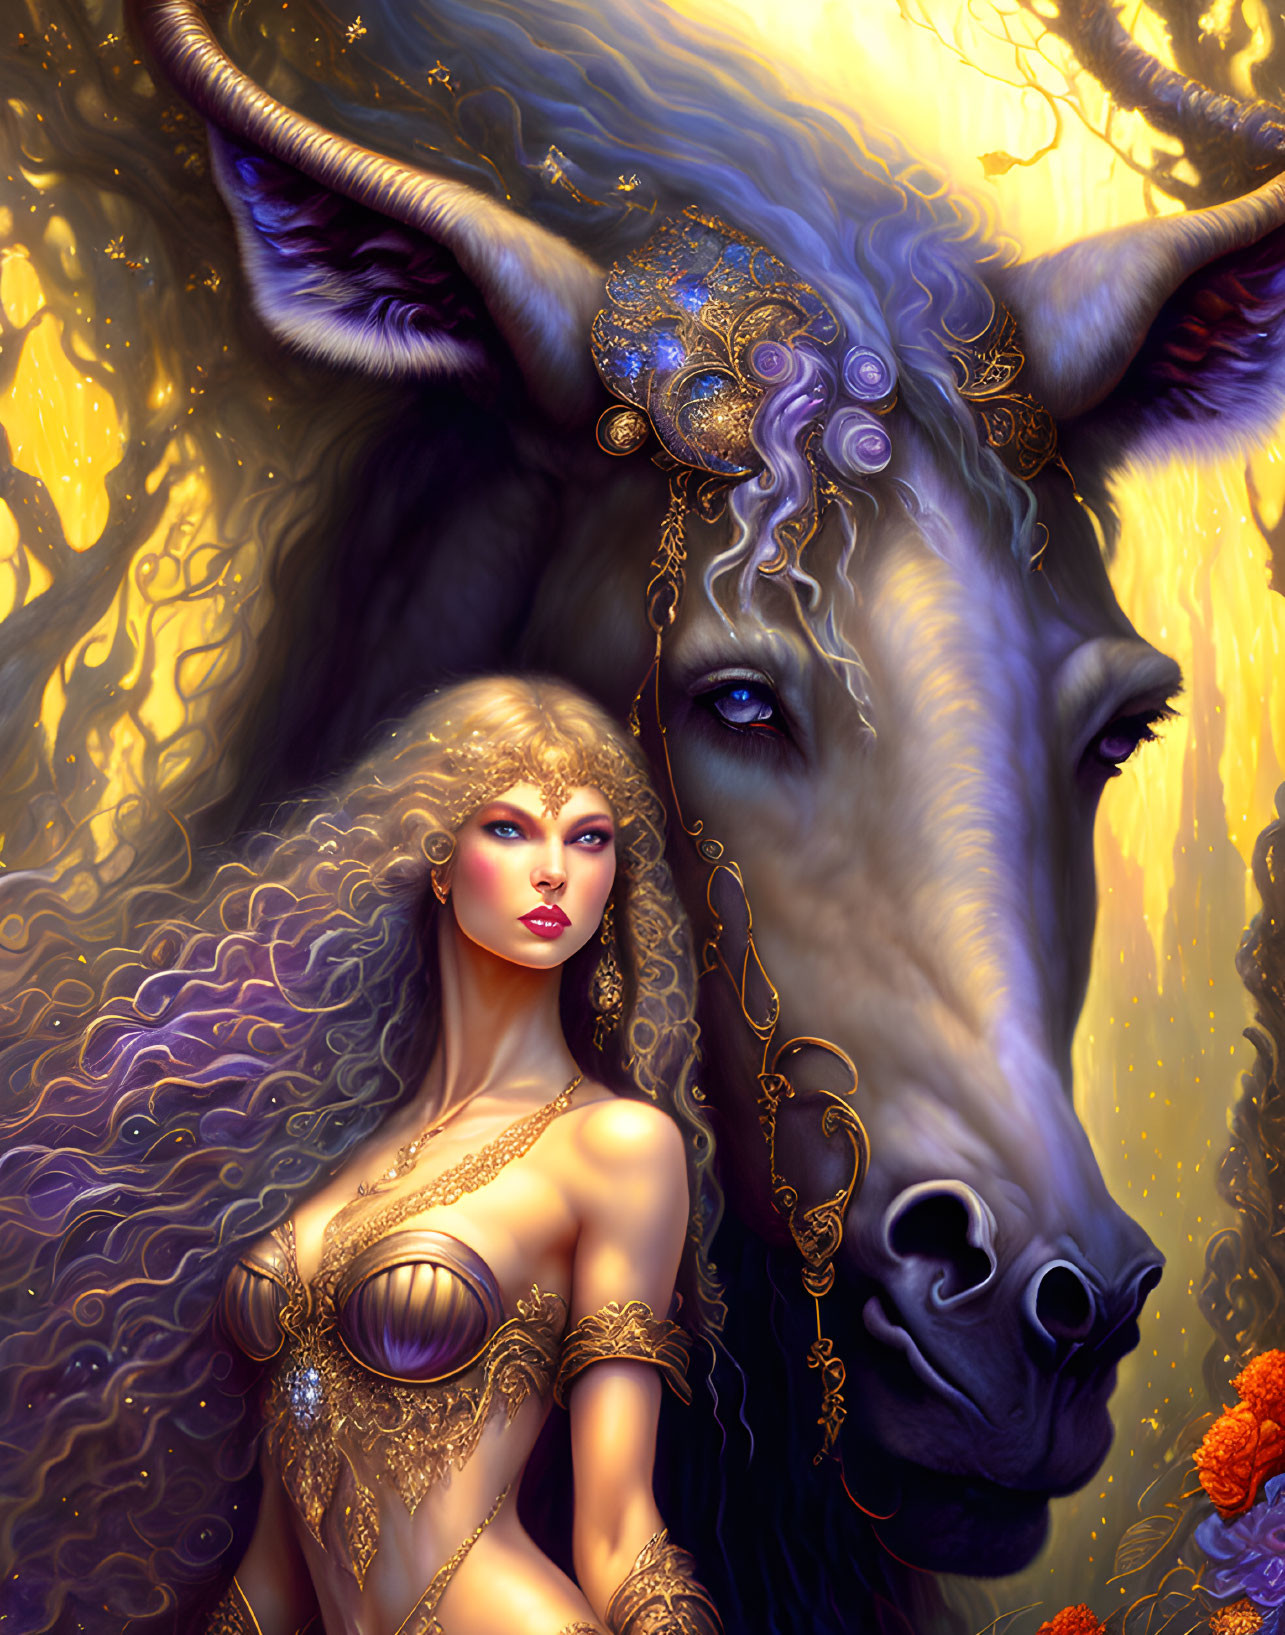 Fantastical image of woman with golden jewelry and mystical unicorn in dreamy background